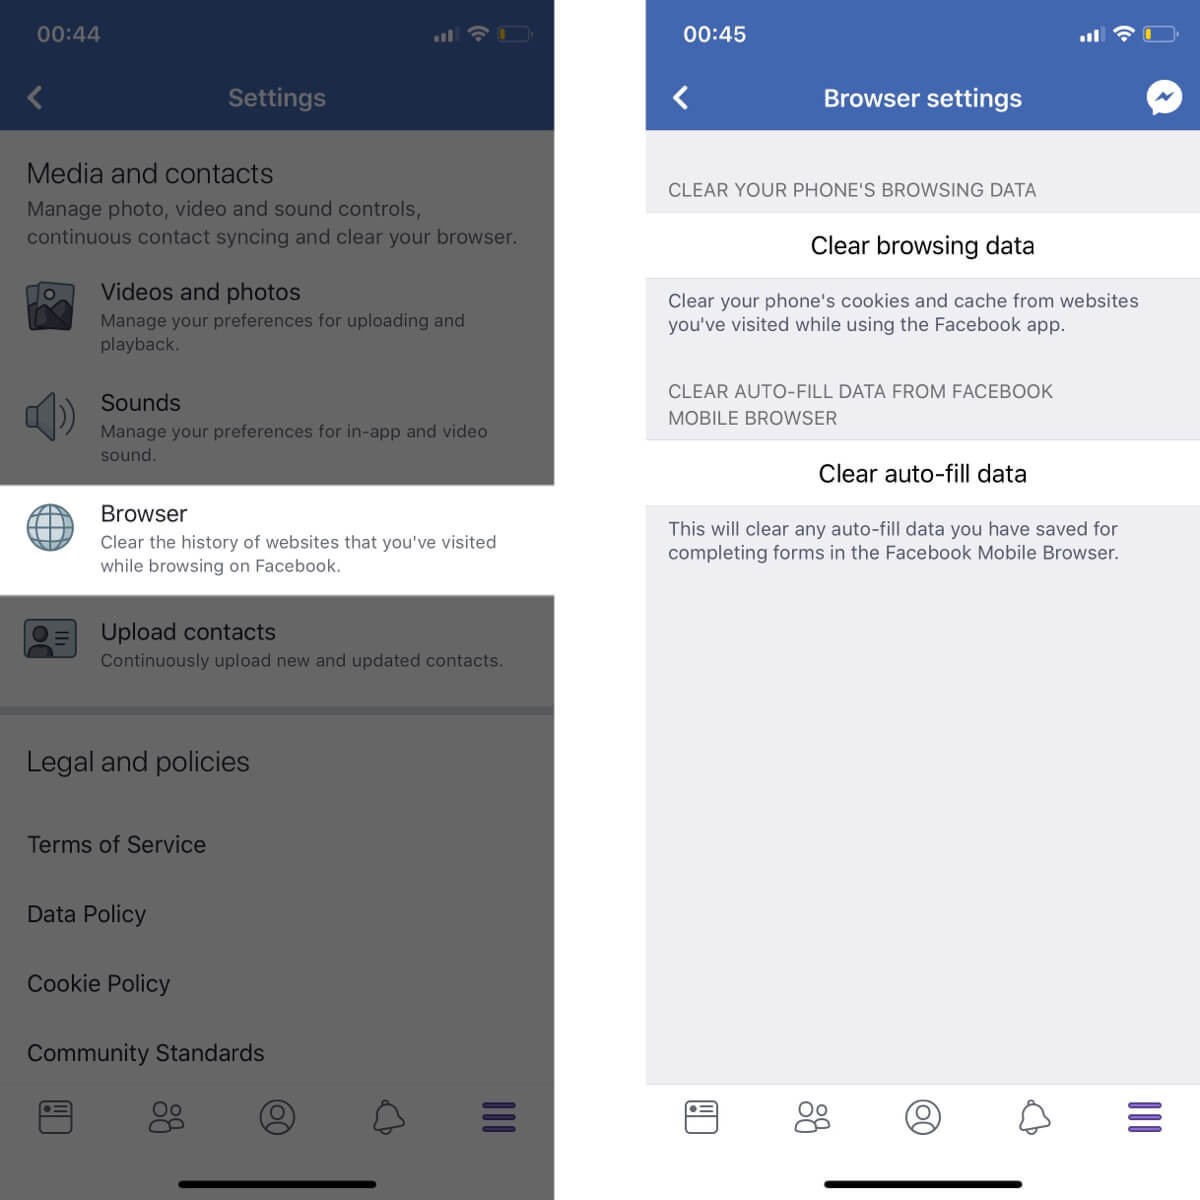 Screenshots showing how to access your Facebook browser settings.